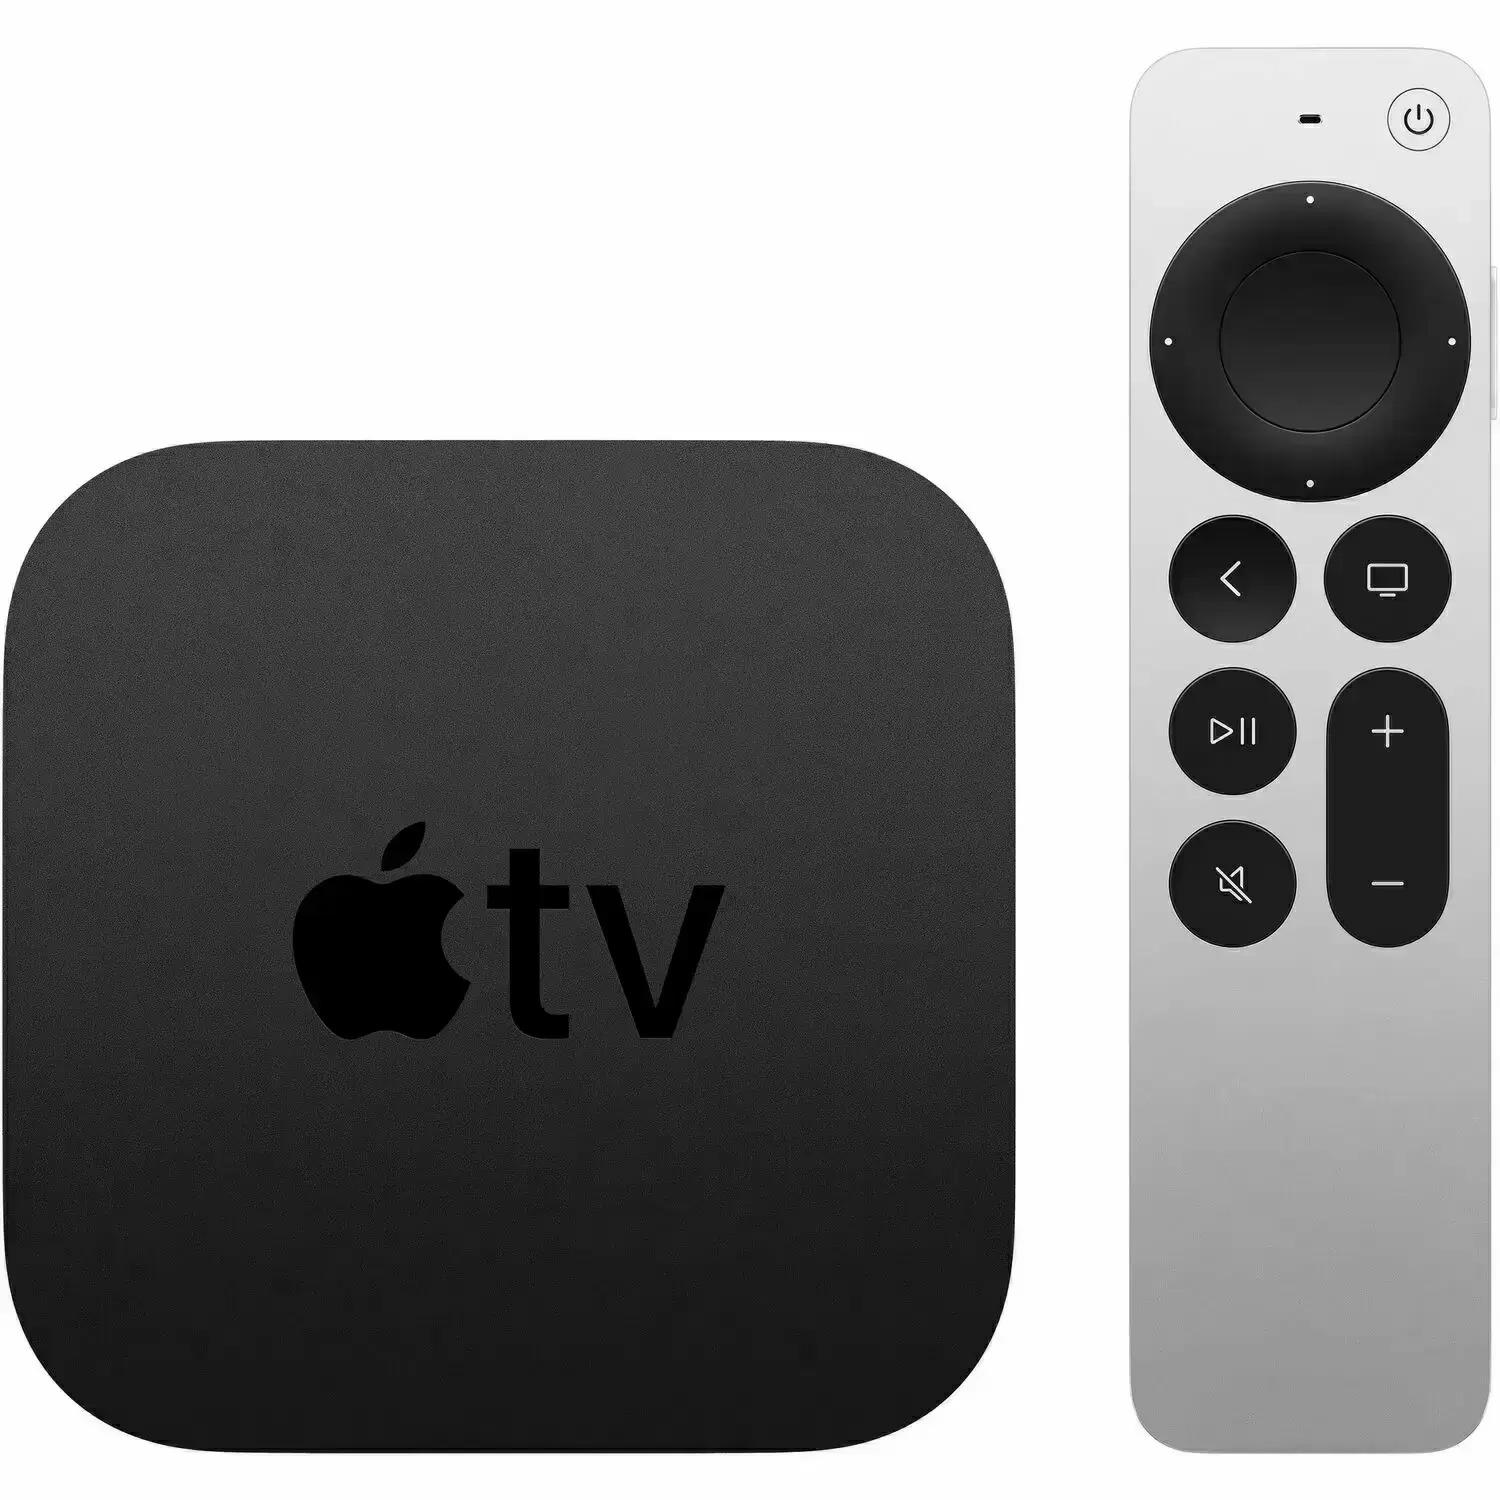 2x 32GB Apple TV 4K Streaming Media Player for $299.98 Shipped